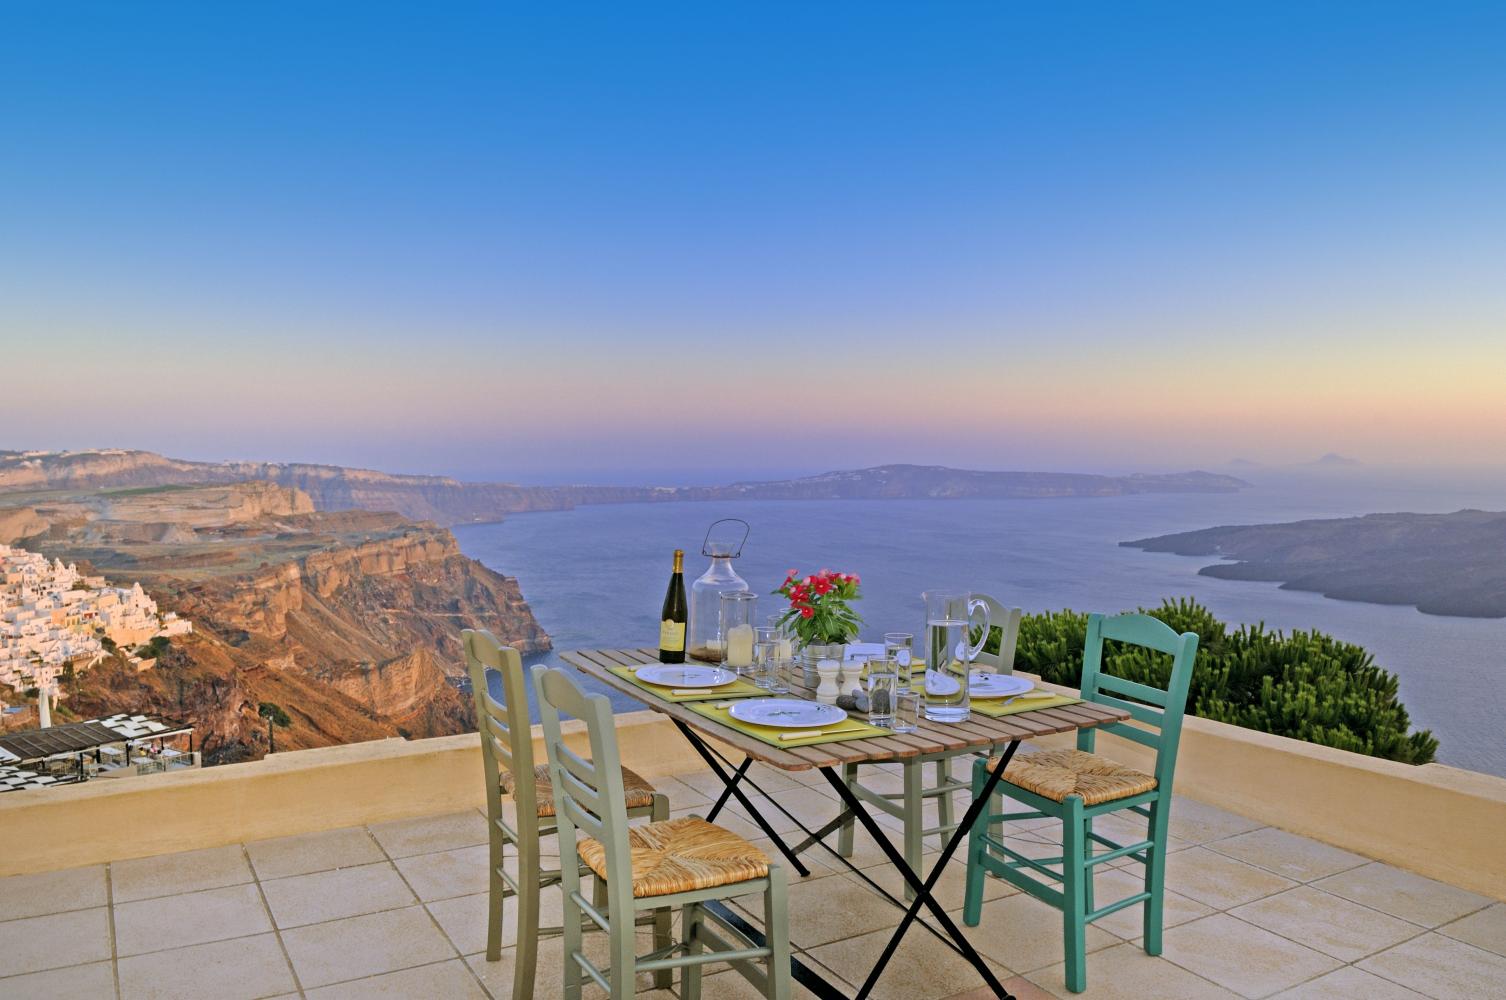 Luxury private villa with pool overlooking the volcanic landscape of Santorini, Greek islands